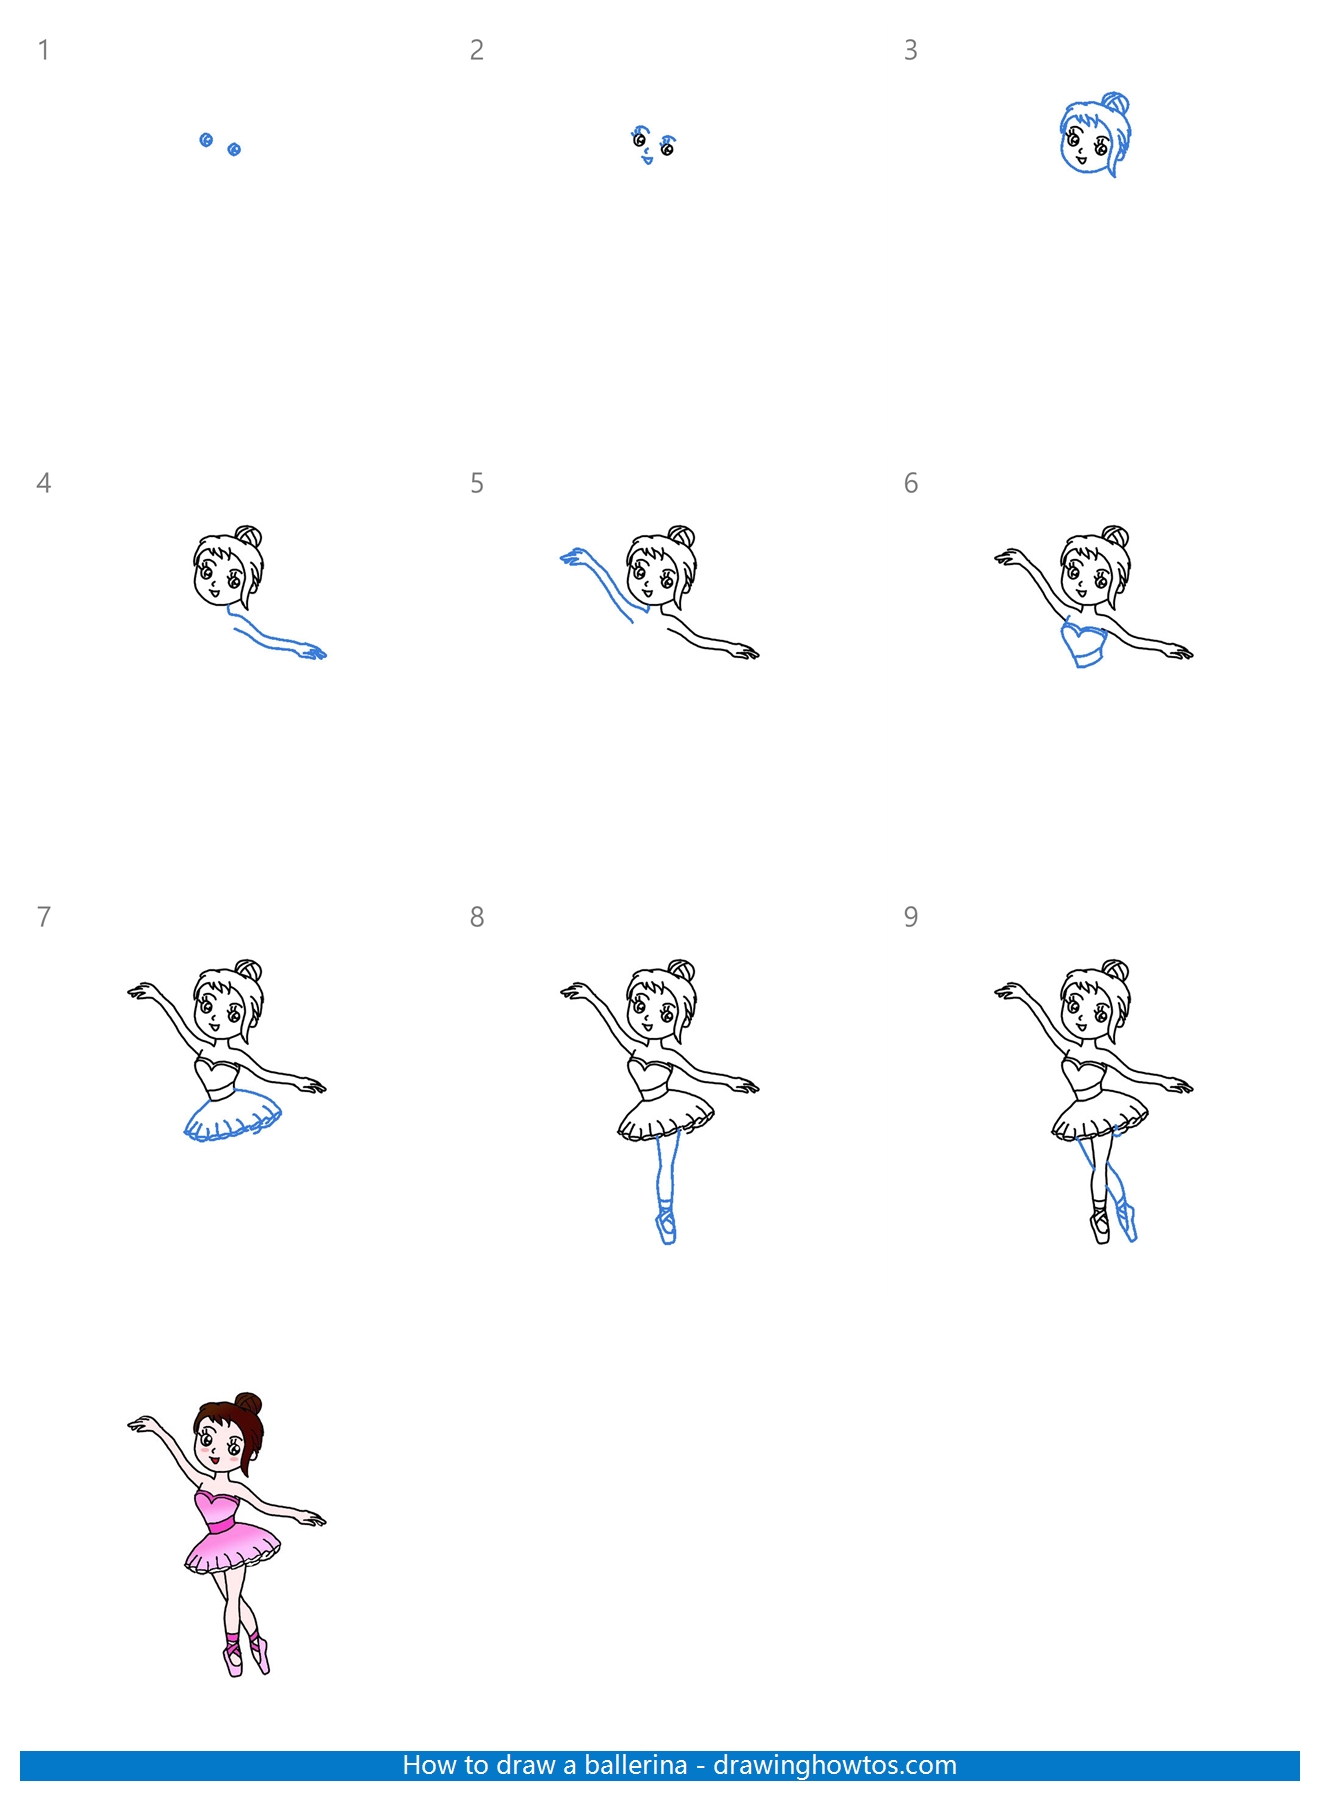 How to Draw a Ballerina Step by Step